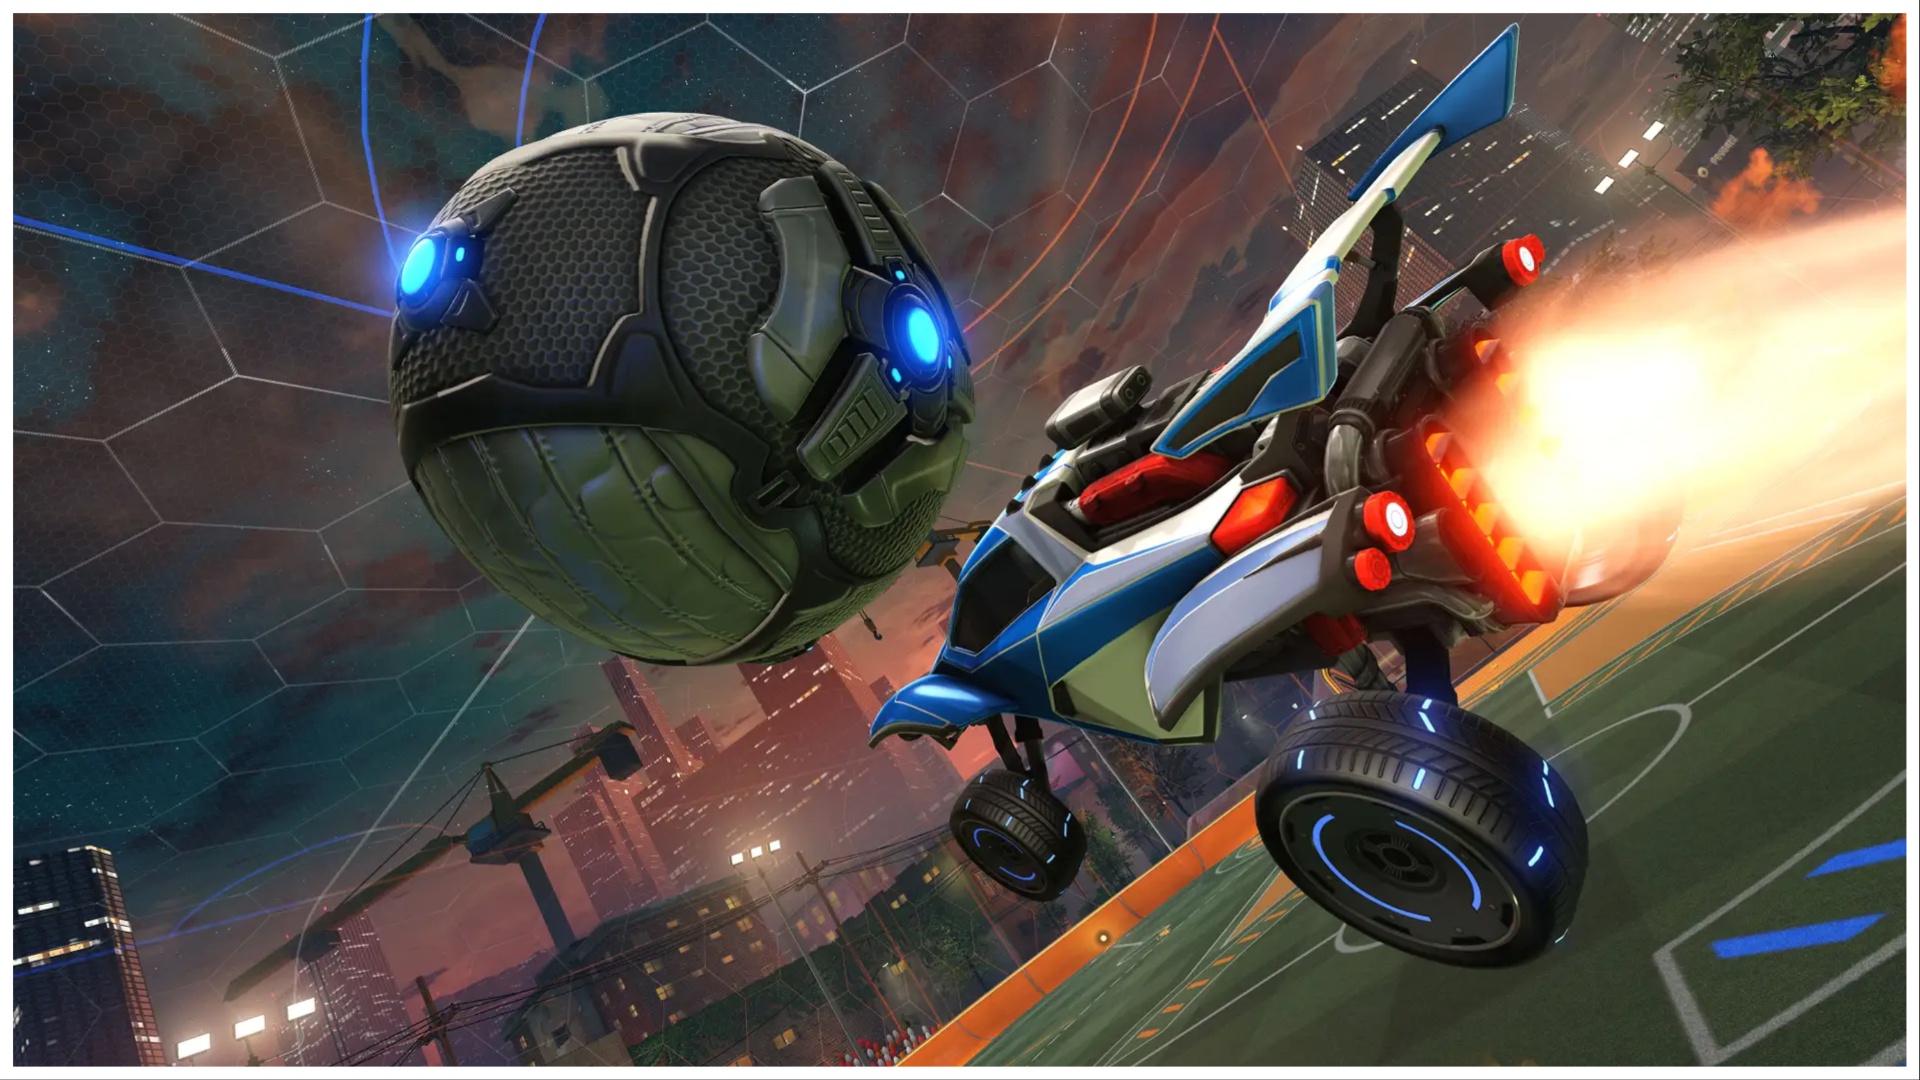 Epic Did Something Unepic… No More Trading In Rocket League After December